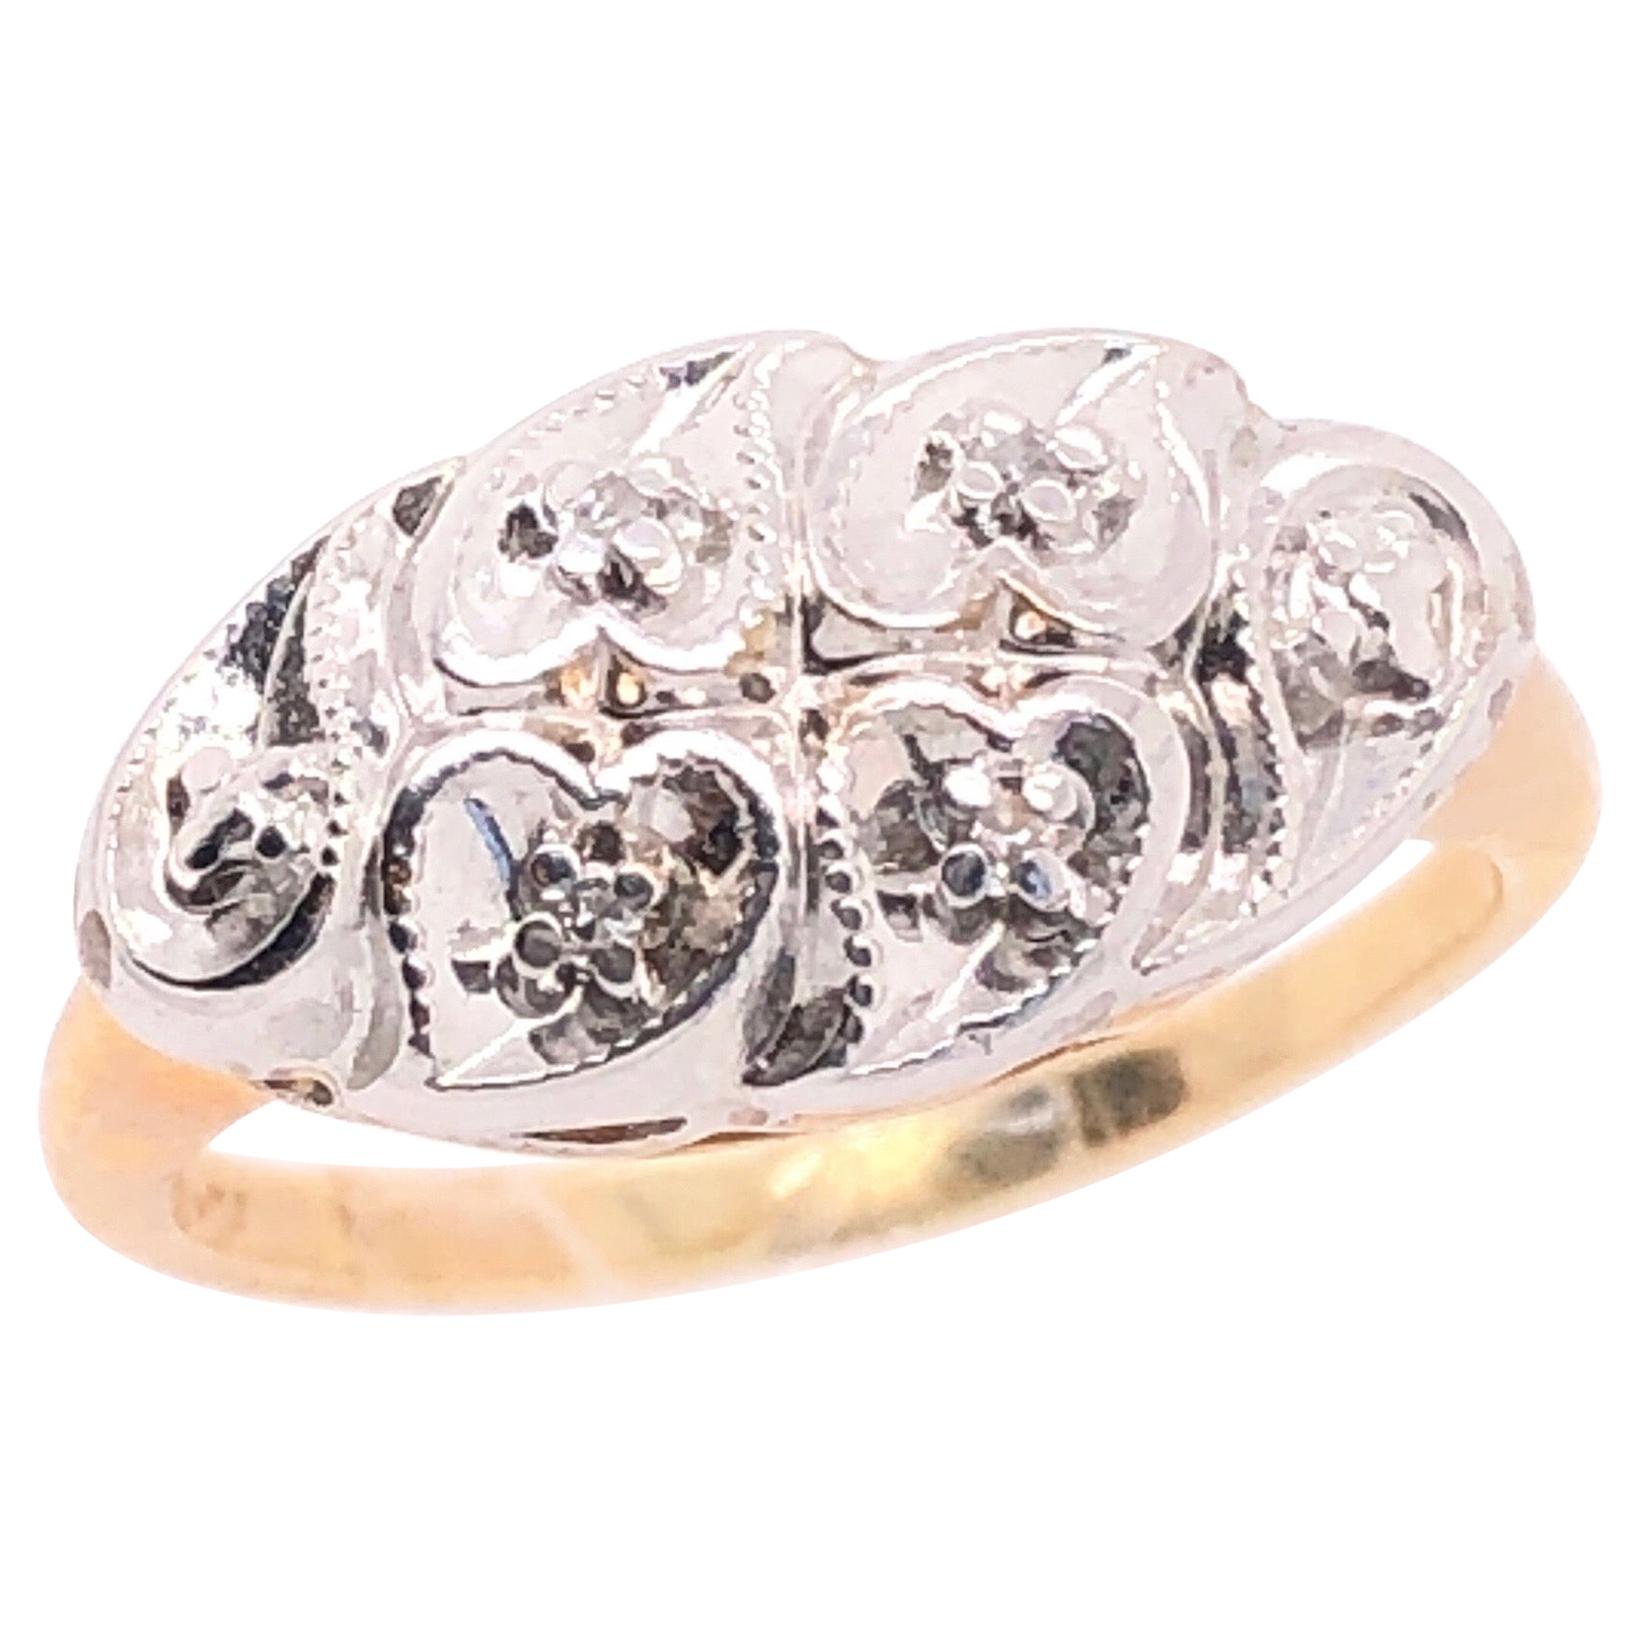 14 Karat Yellow and White Gold Ring with Diamond Multi Hearts